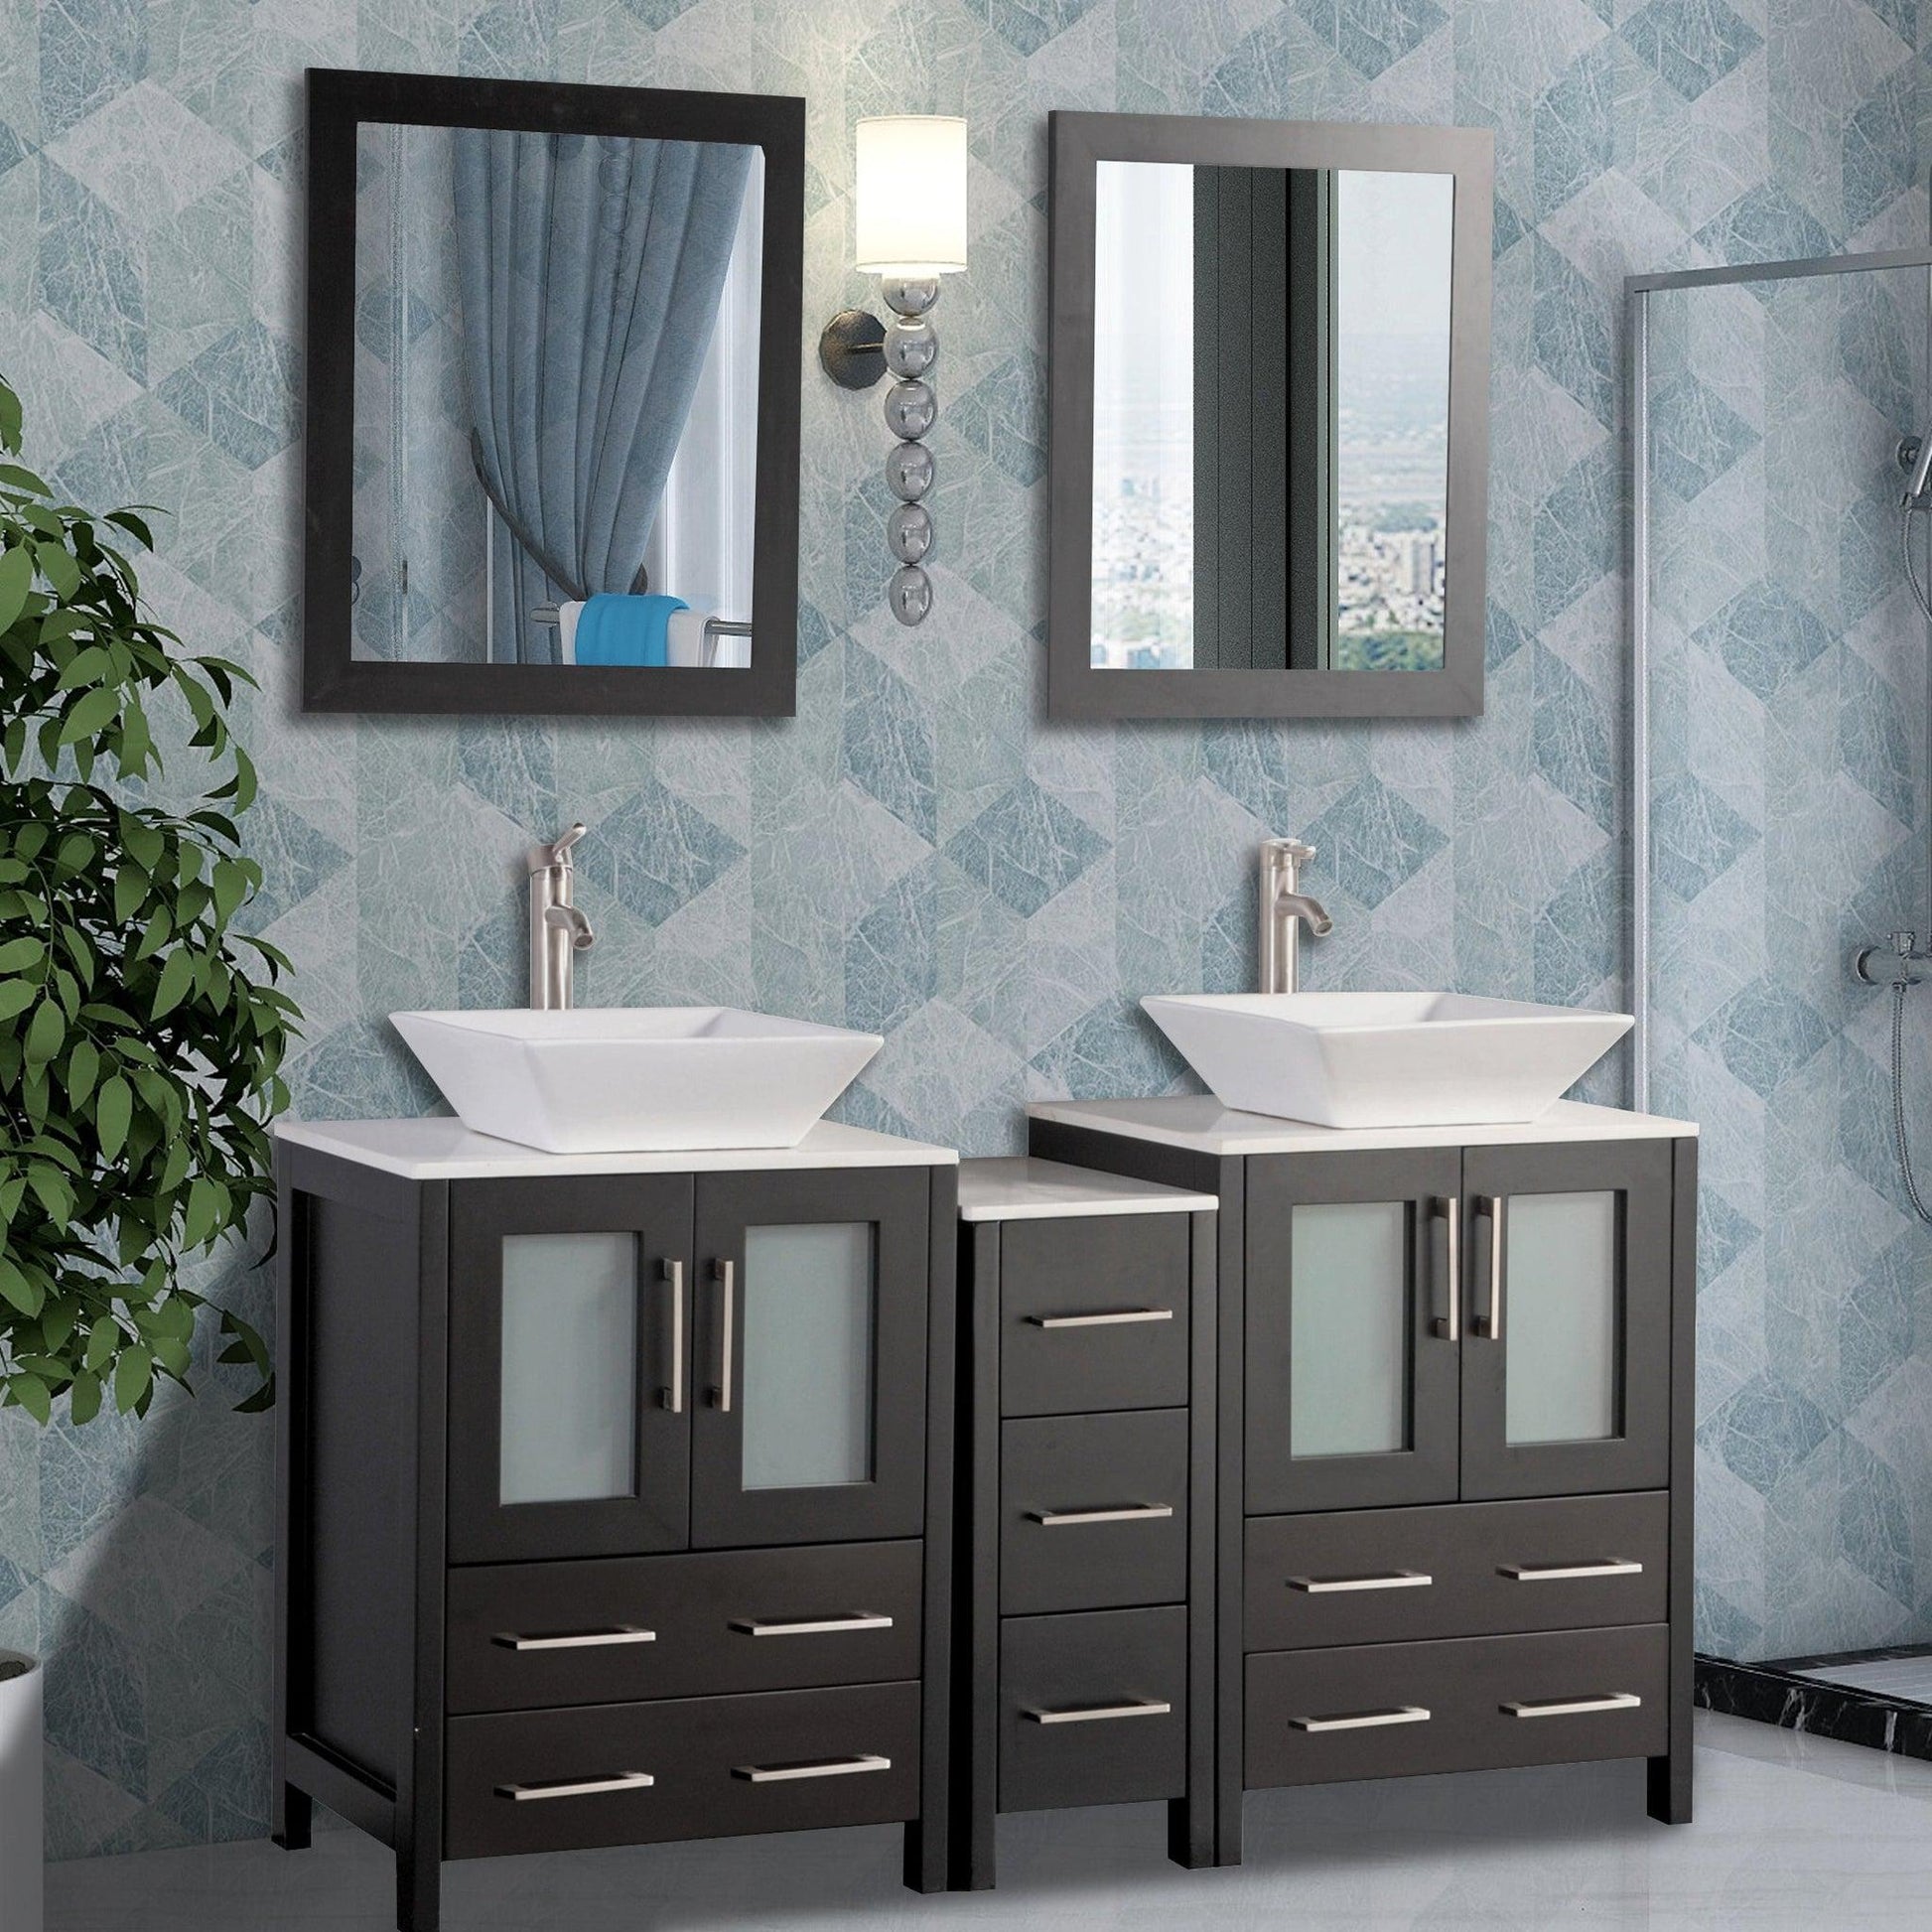 Vanity Art Ravenna 60" Double Espresso Freestanding Vanity Set With White Engineered Marble Top, 2 Ceramic Vessel Sinks, 1 Side Cabinet and 2 Mirrors